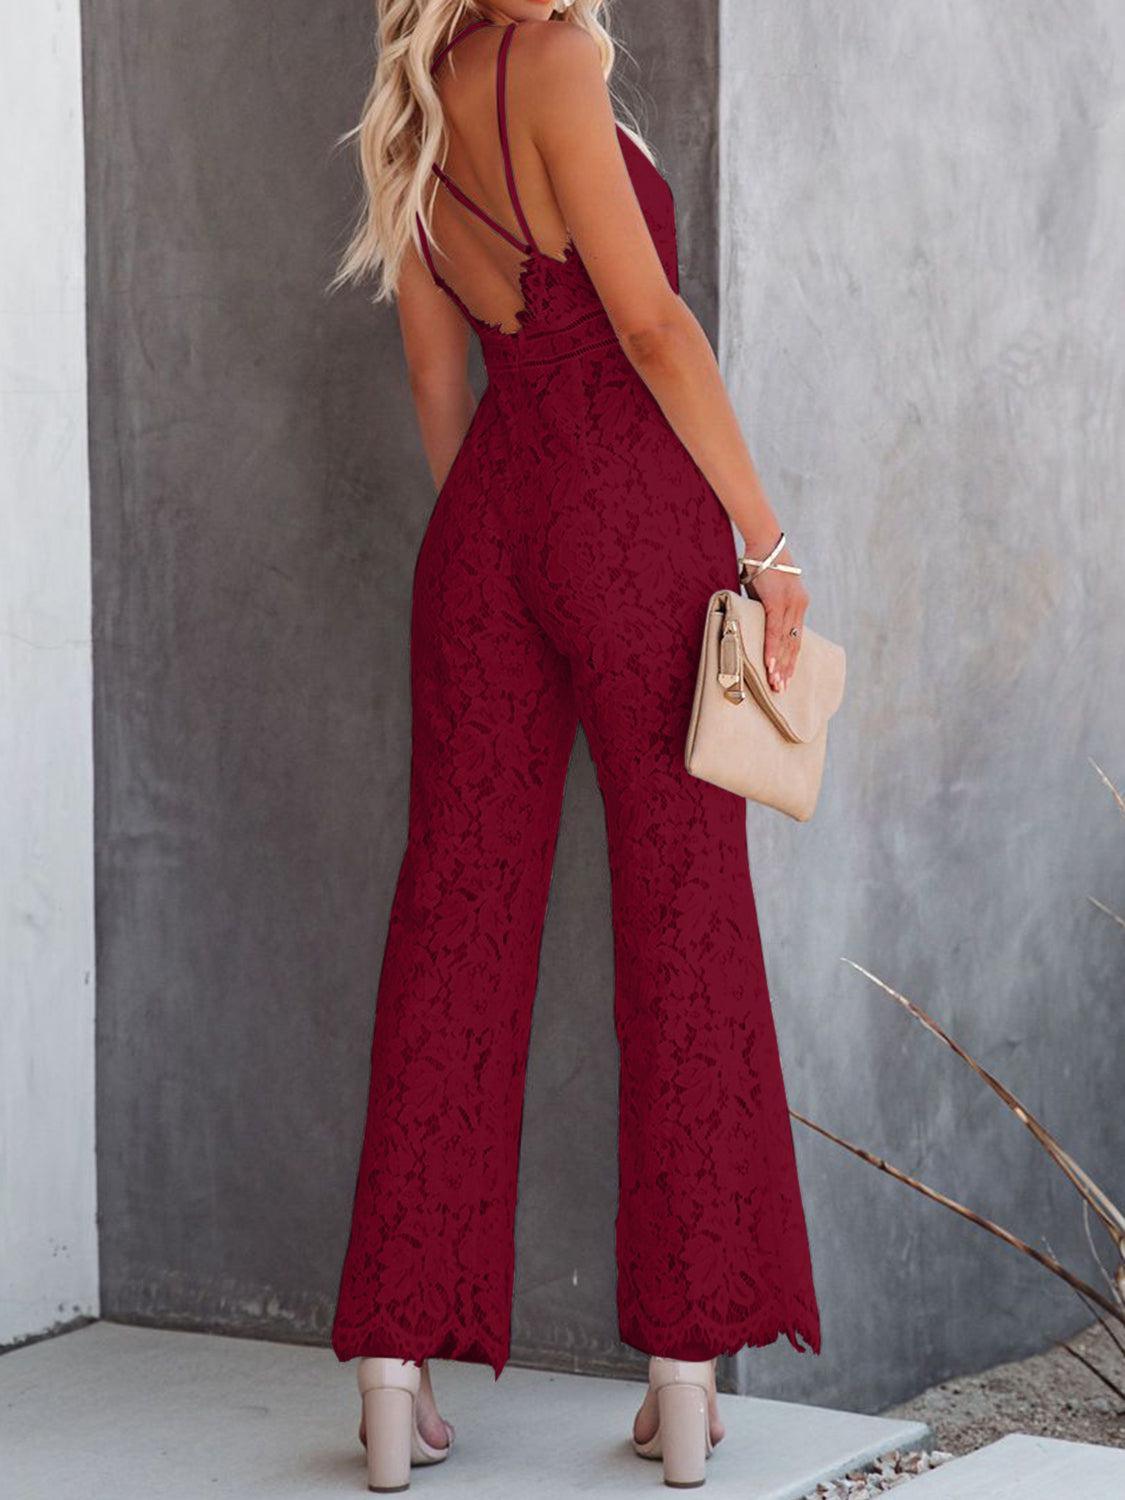 a woman in a red lace jumpsuit